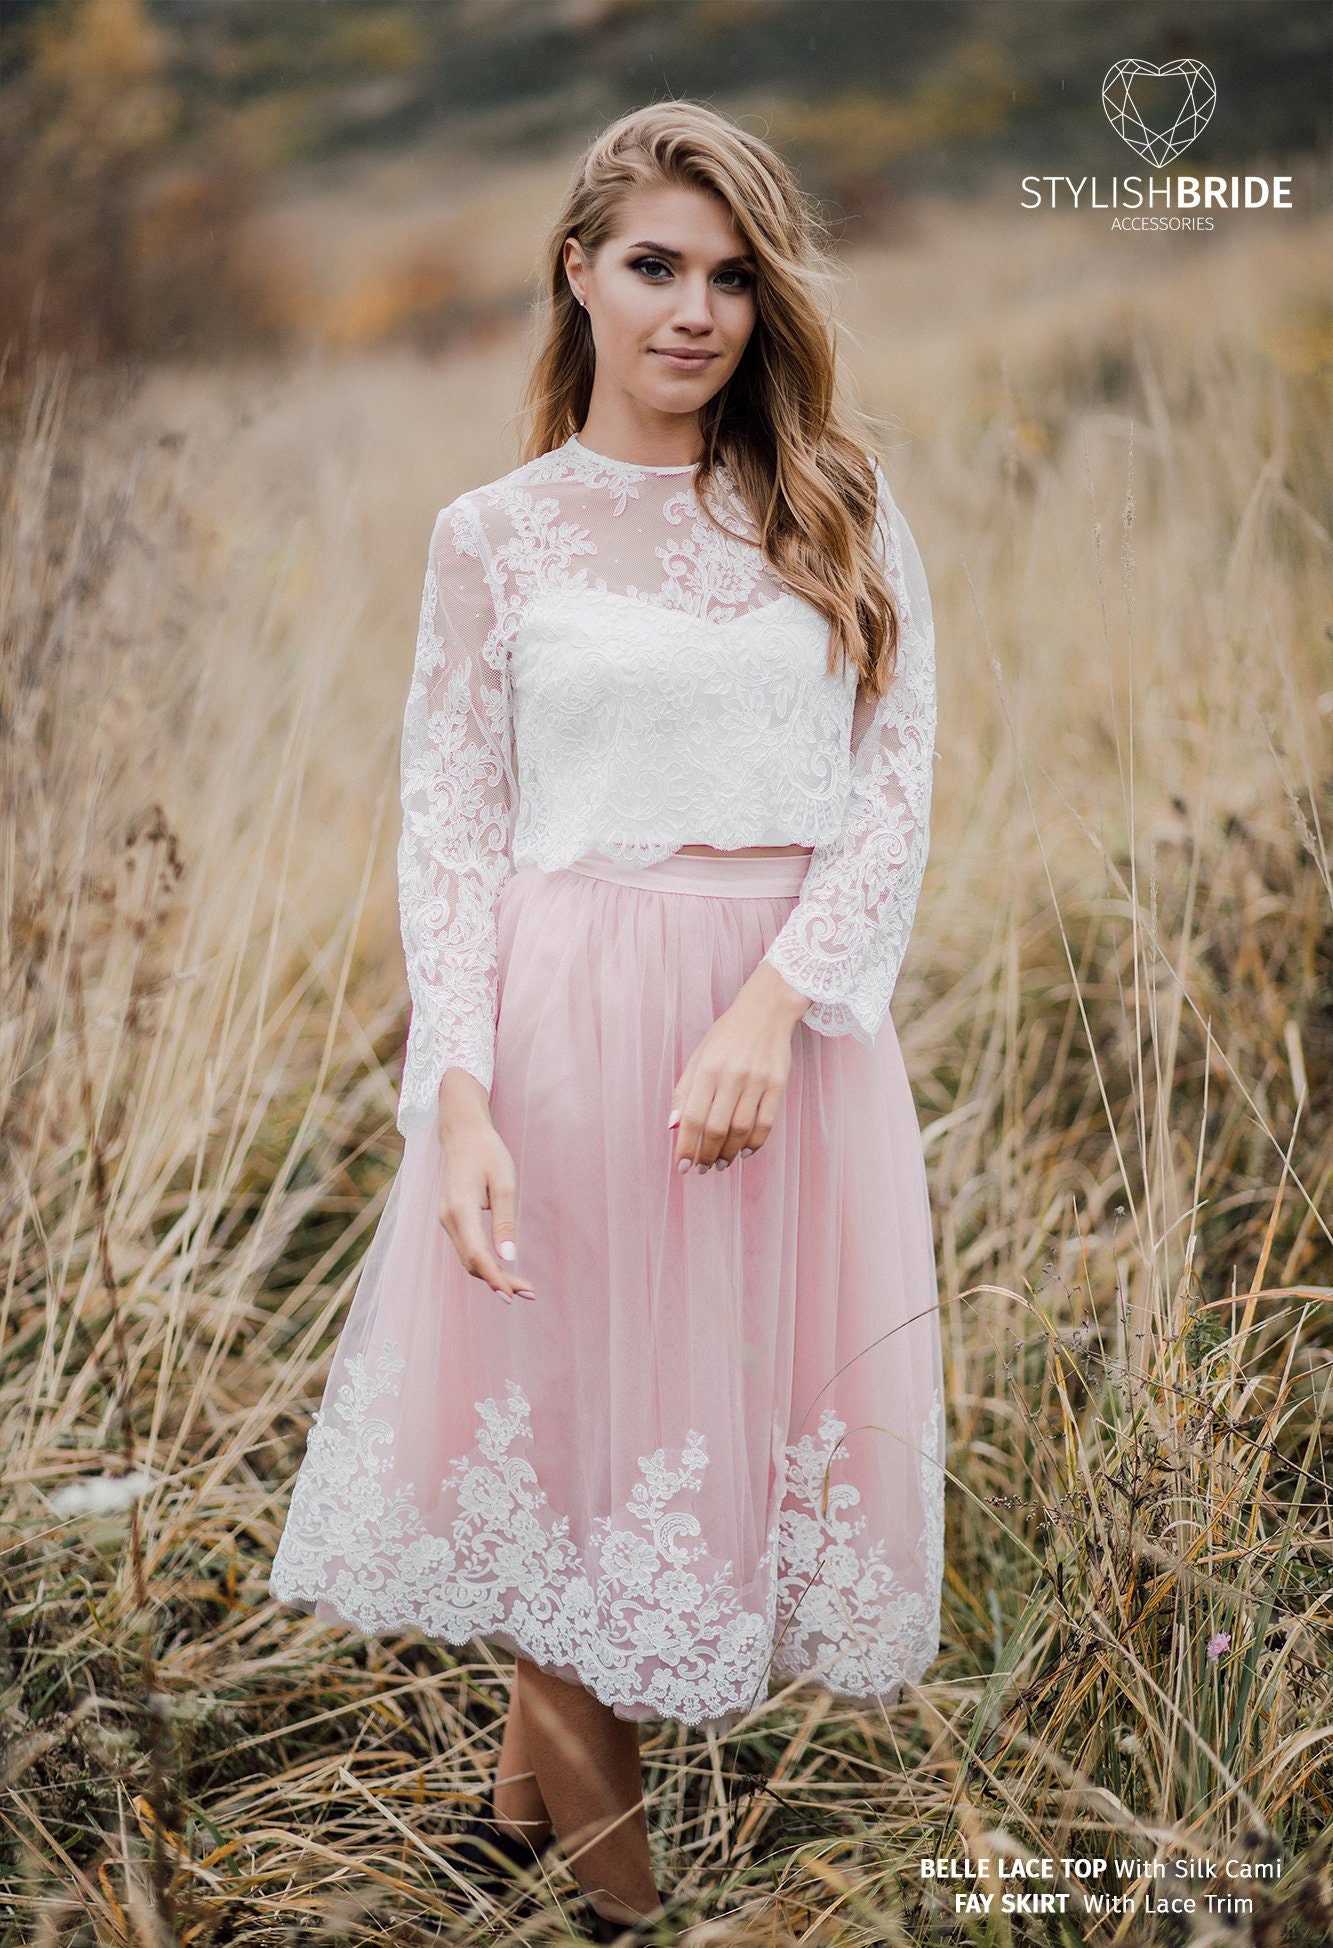 Engagement Belle Lace Dress, Tulle Skirt With Lace Trim and Belle